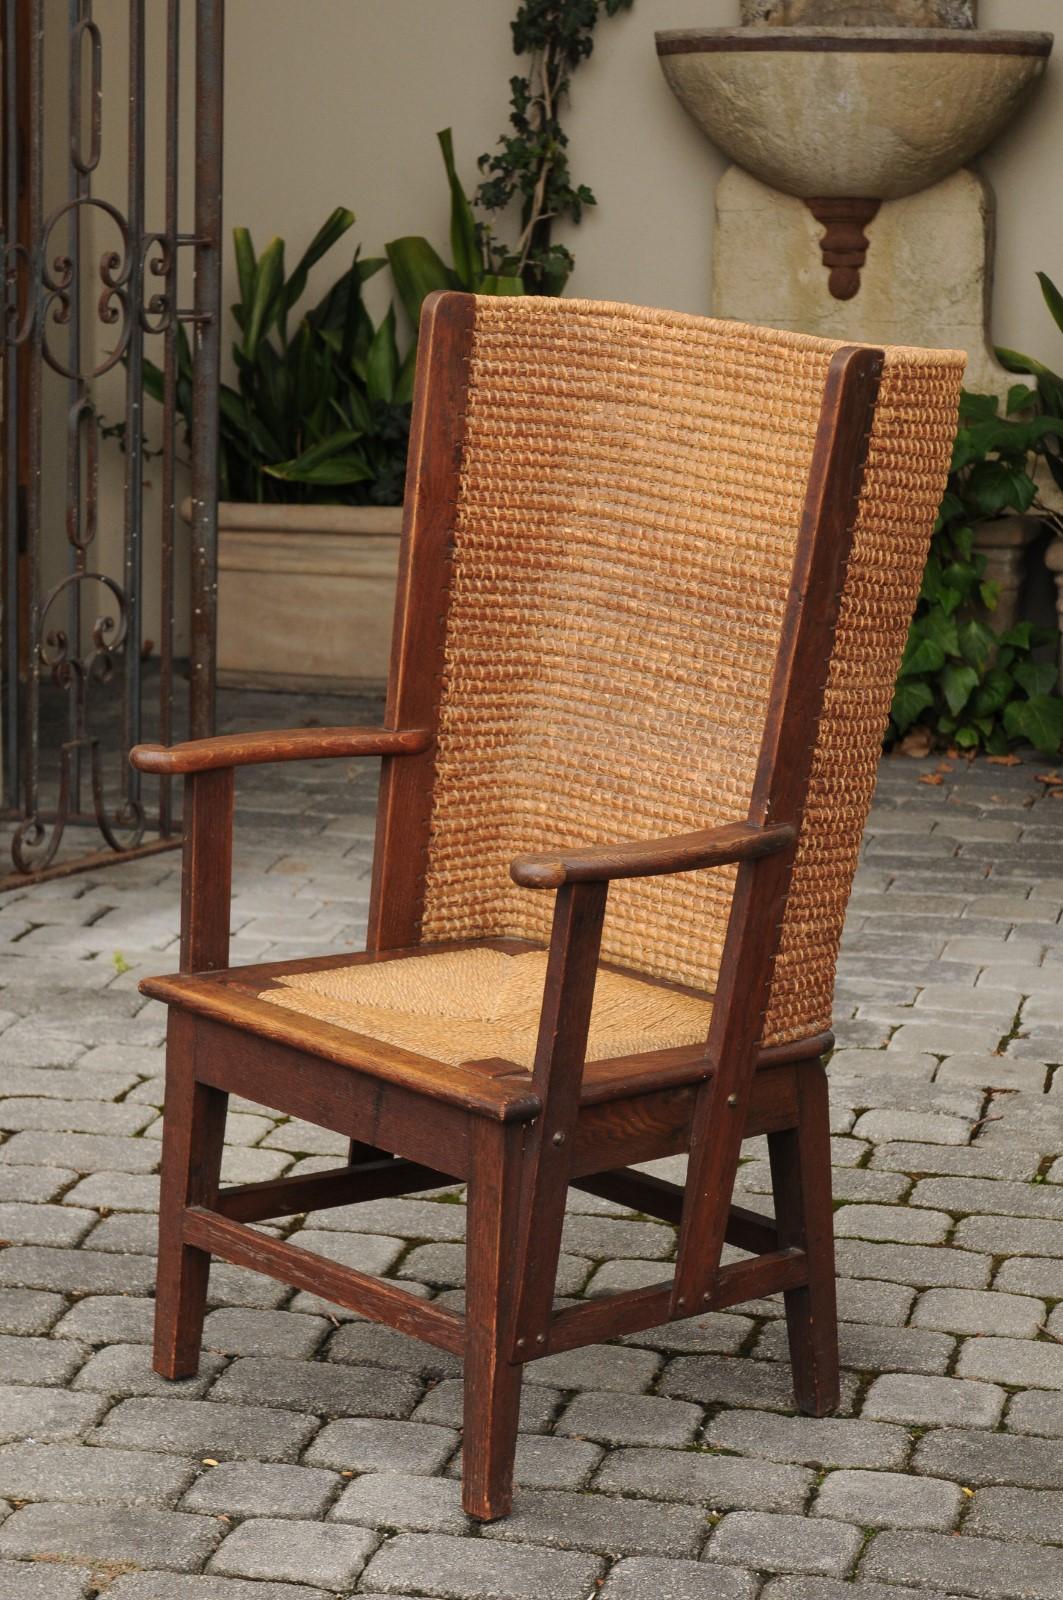 Scottish 1900s Oak Orkney Island Wingback Chair with Handwoven Straw Back 5